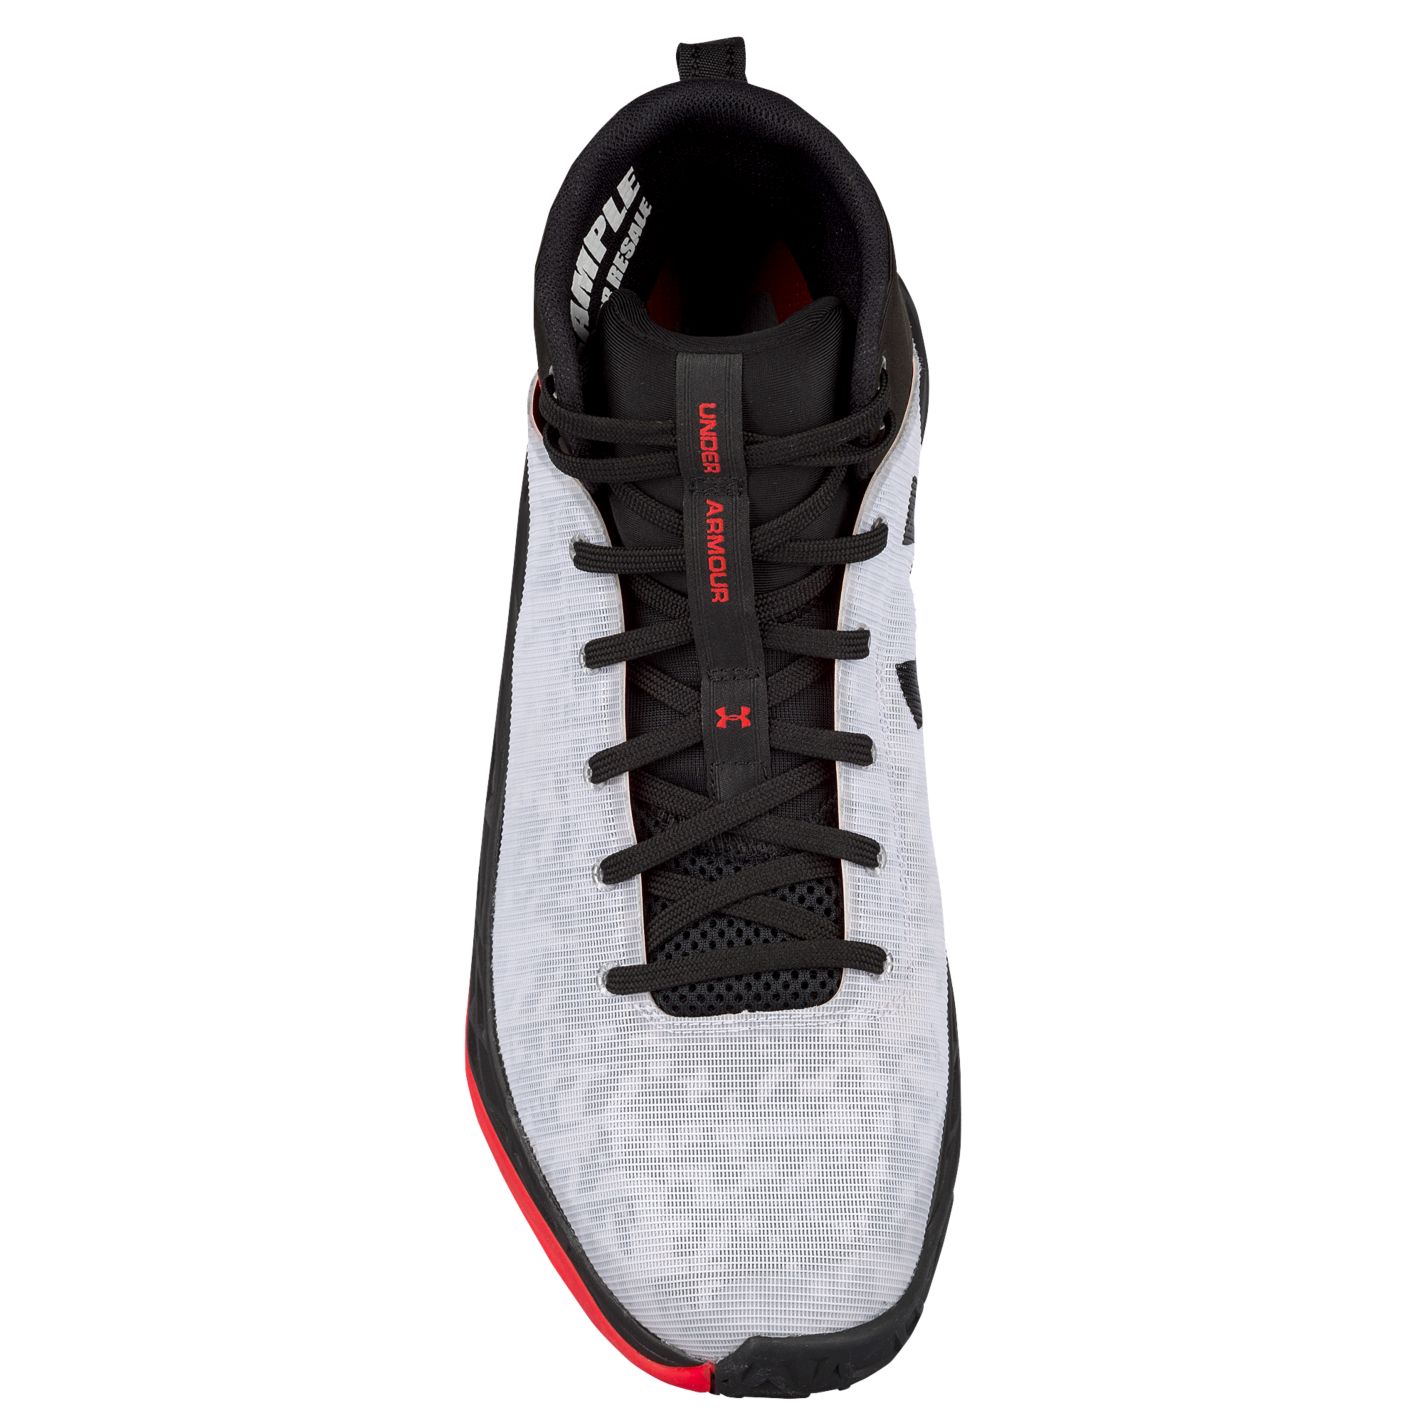 The Under Armour Fire Shot is Available Now 5